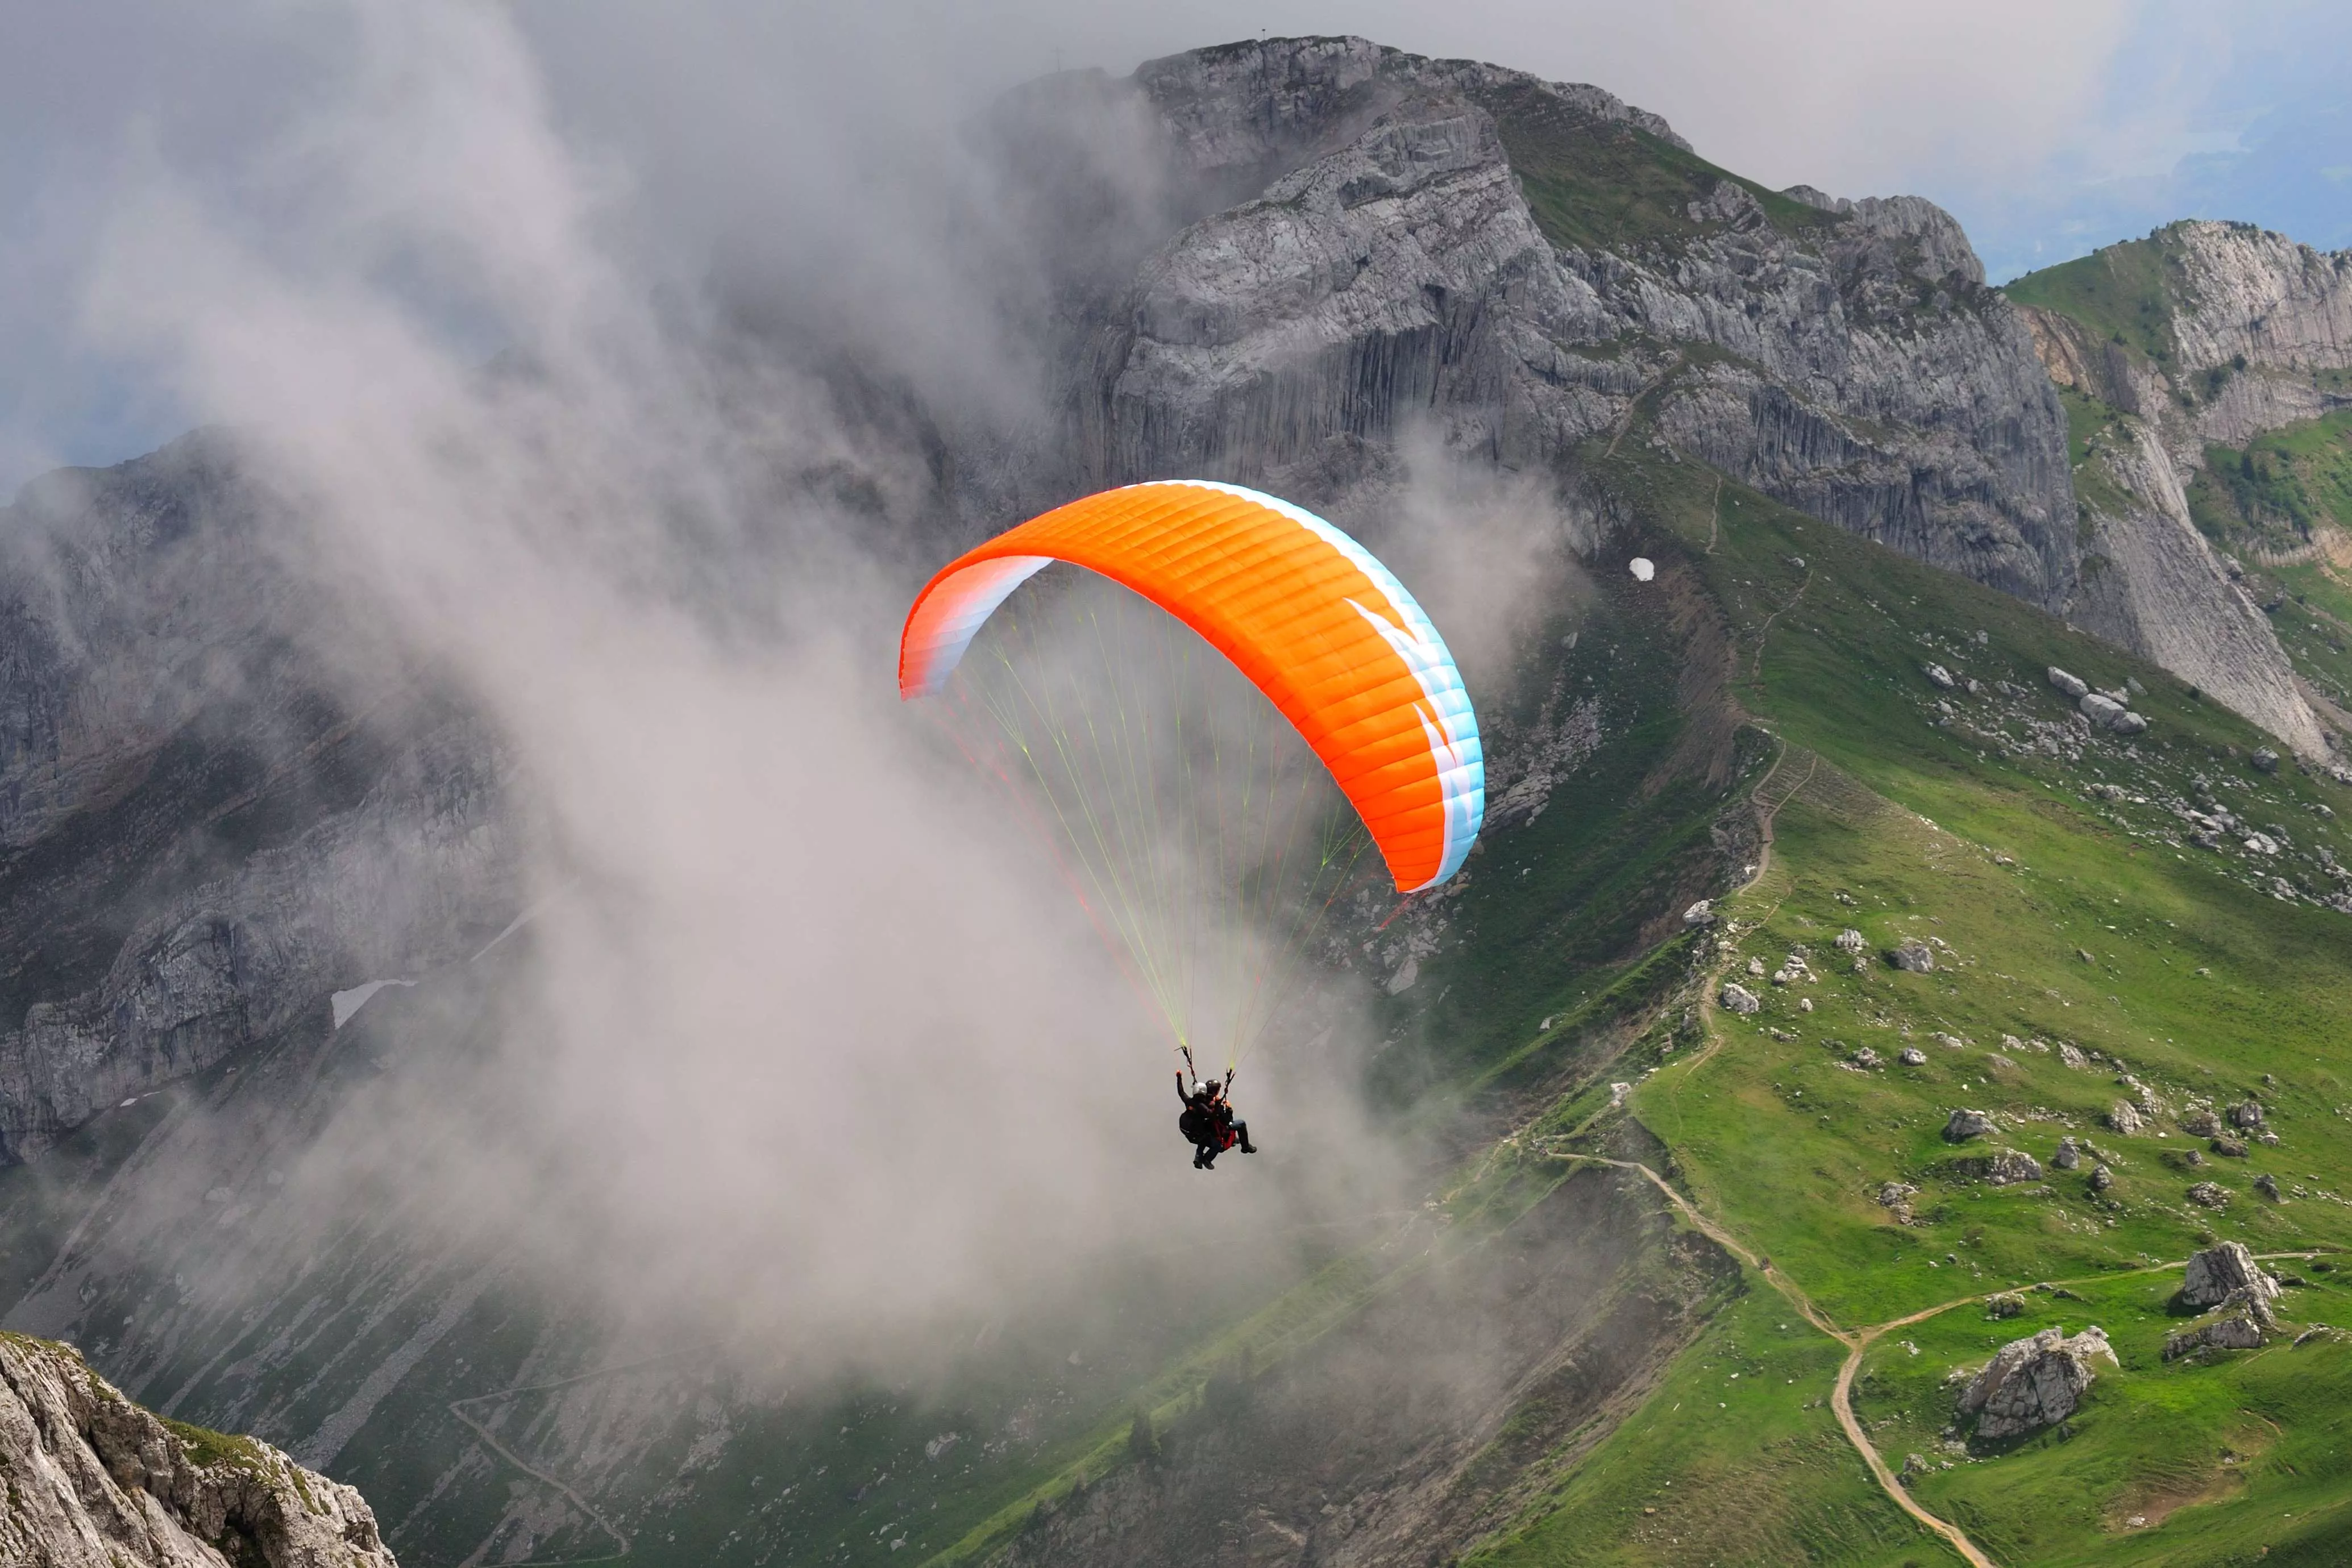 Paragliding in Bir Billing in India, Central Asia | Paragliding - Rated 9.2